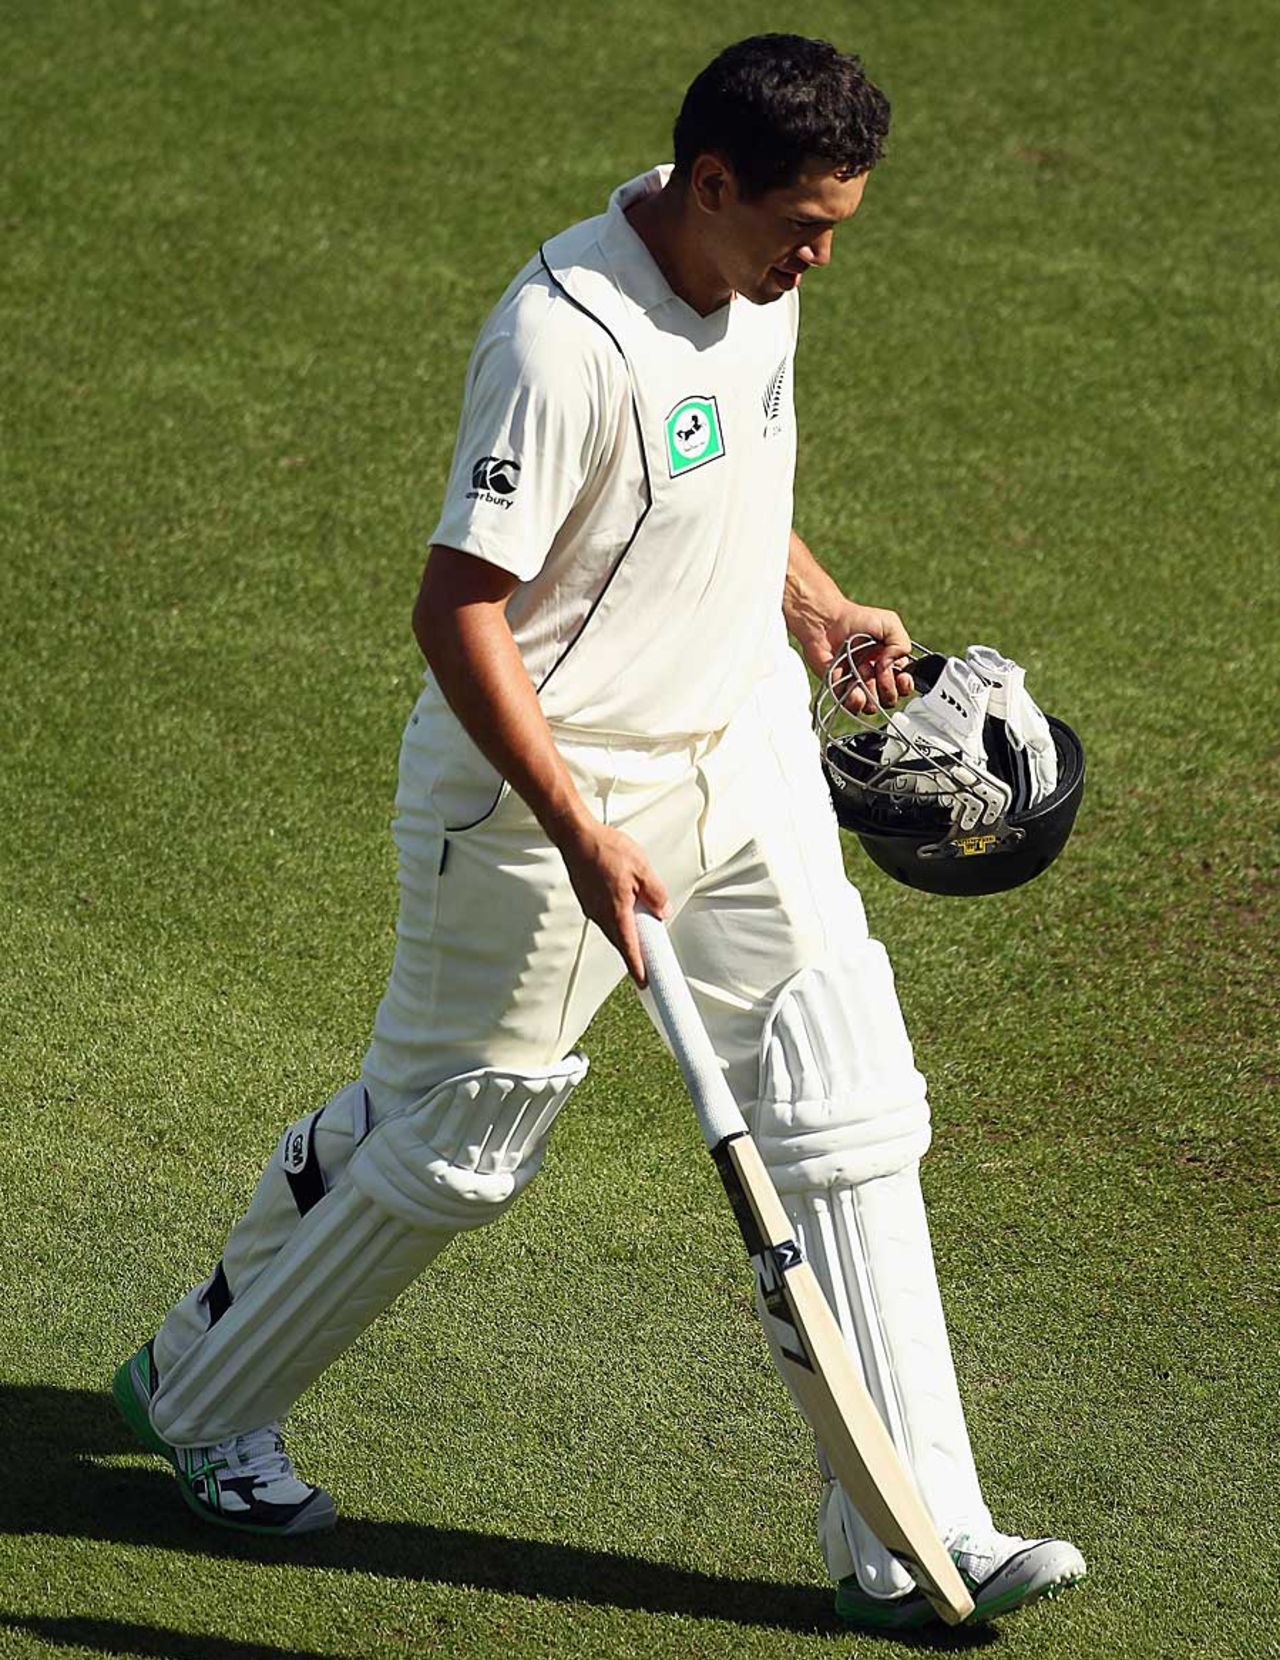 Ross Taylor walks back after being run out, 1st Test, Hamilton, 3rd day, January 9, 2011